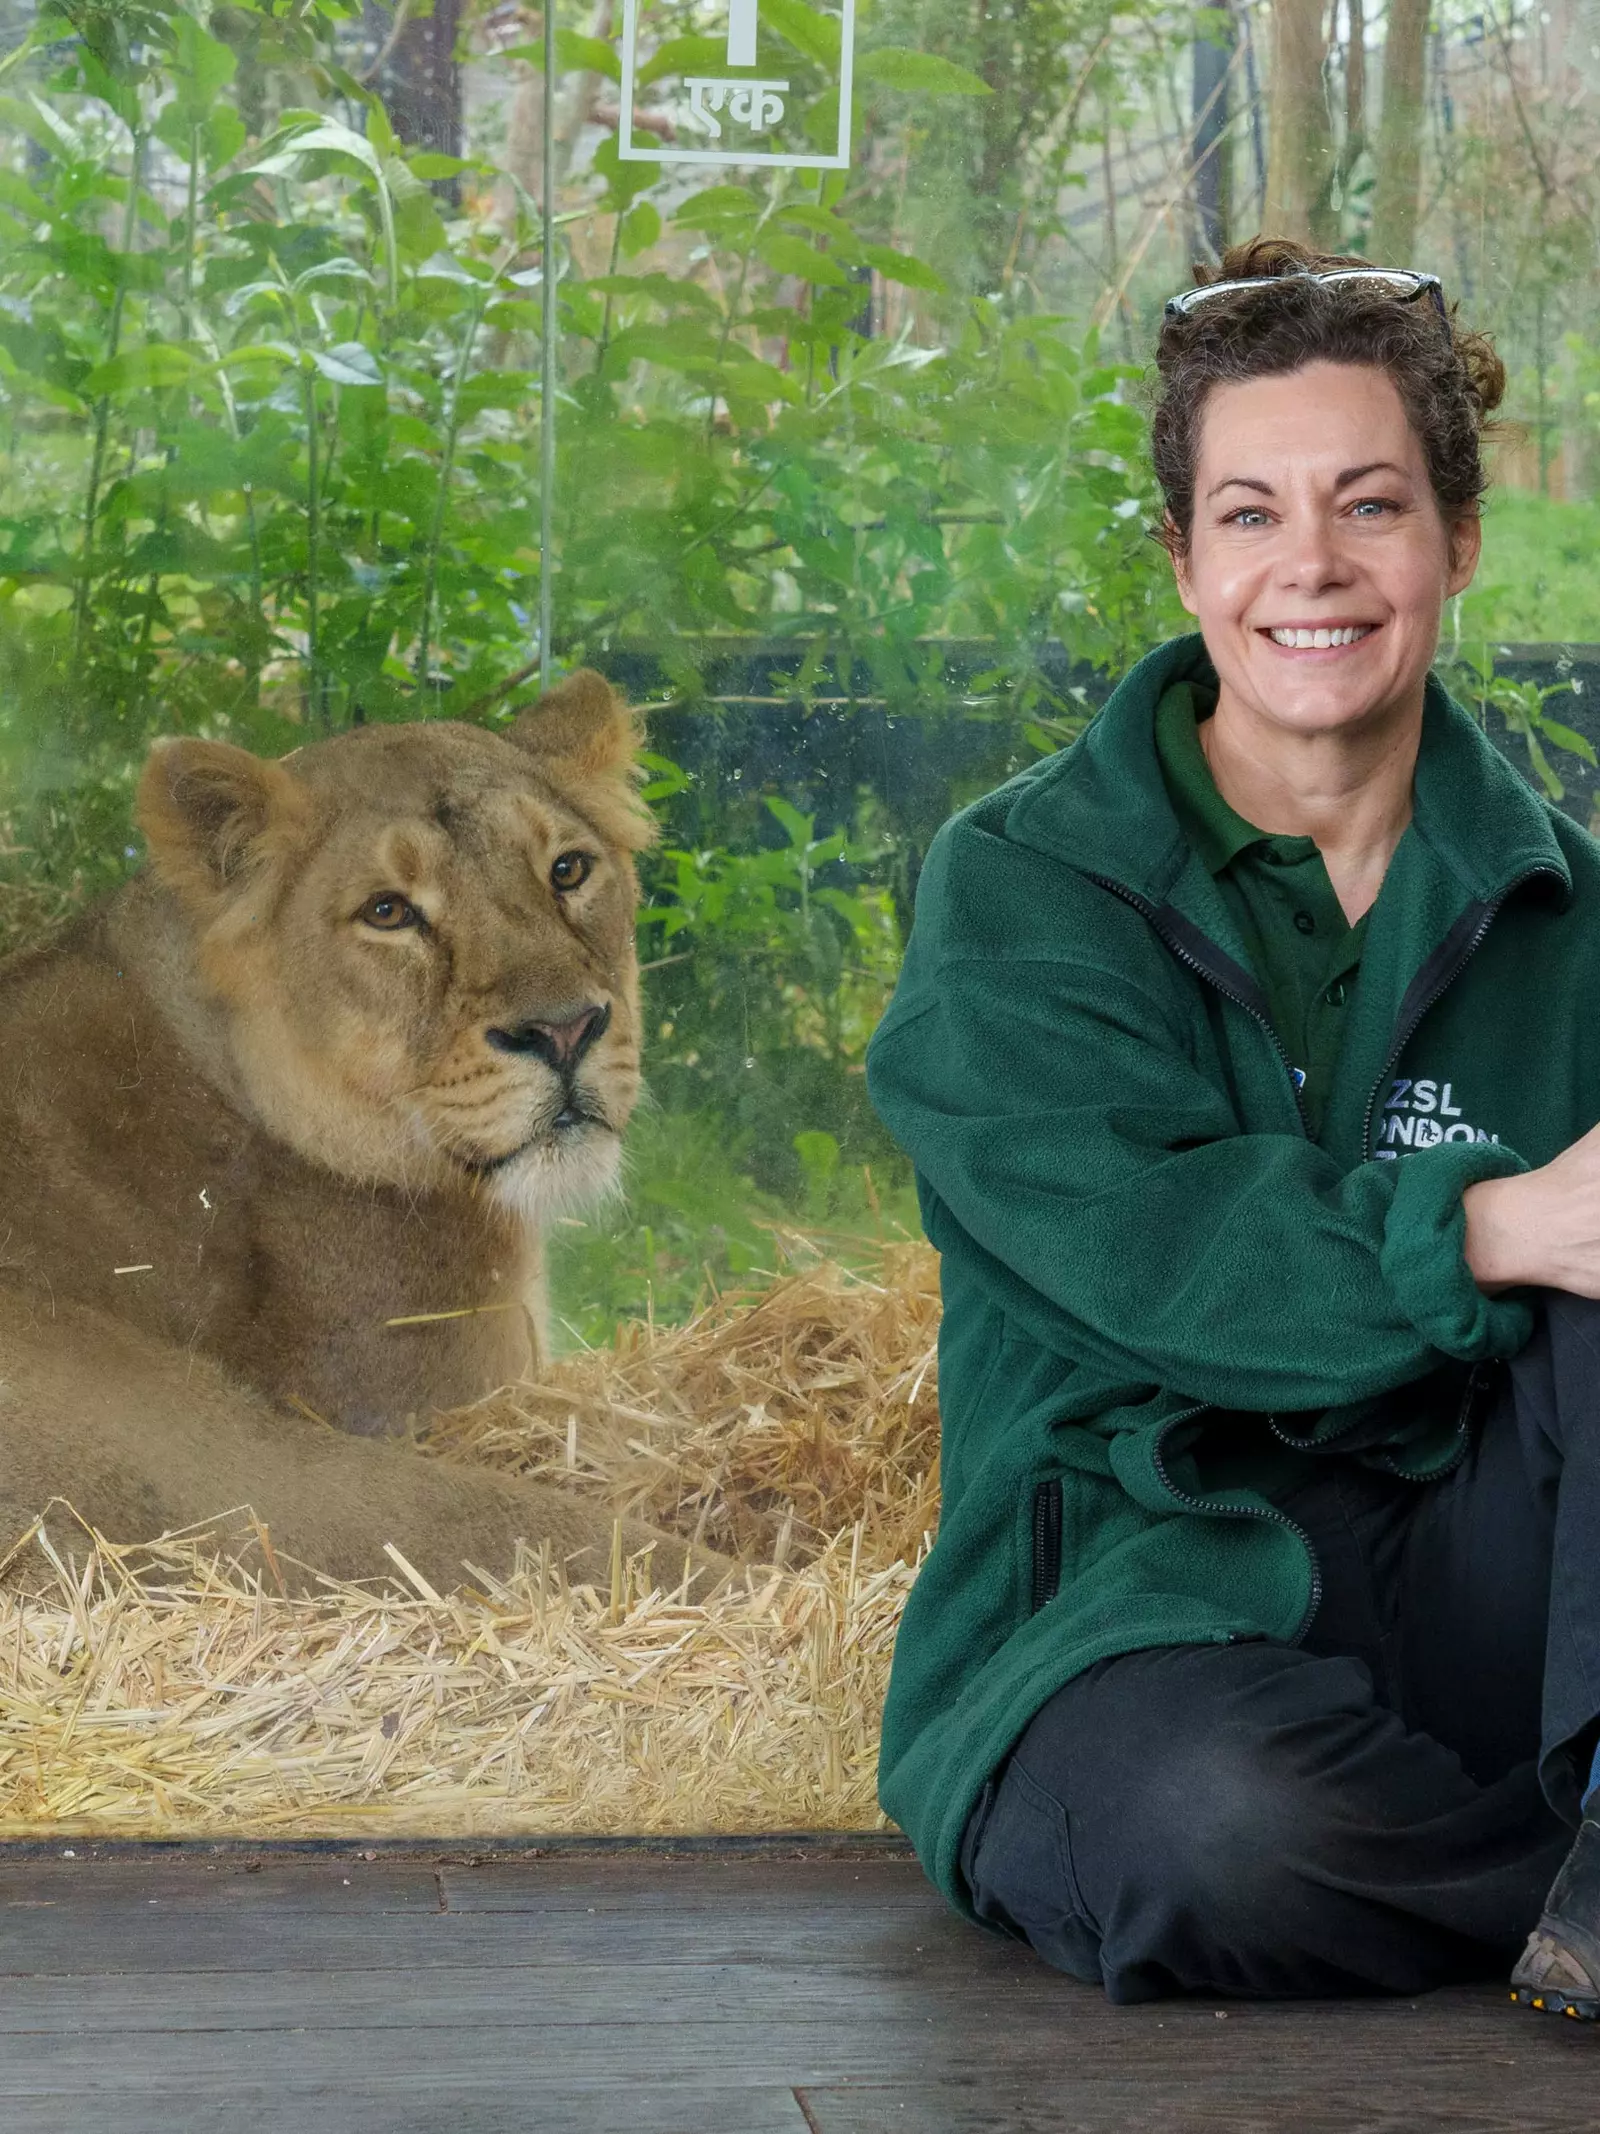 London Zoo volunteer Briony with lioness